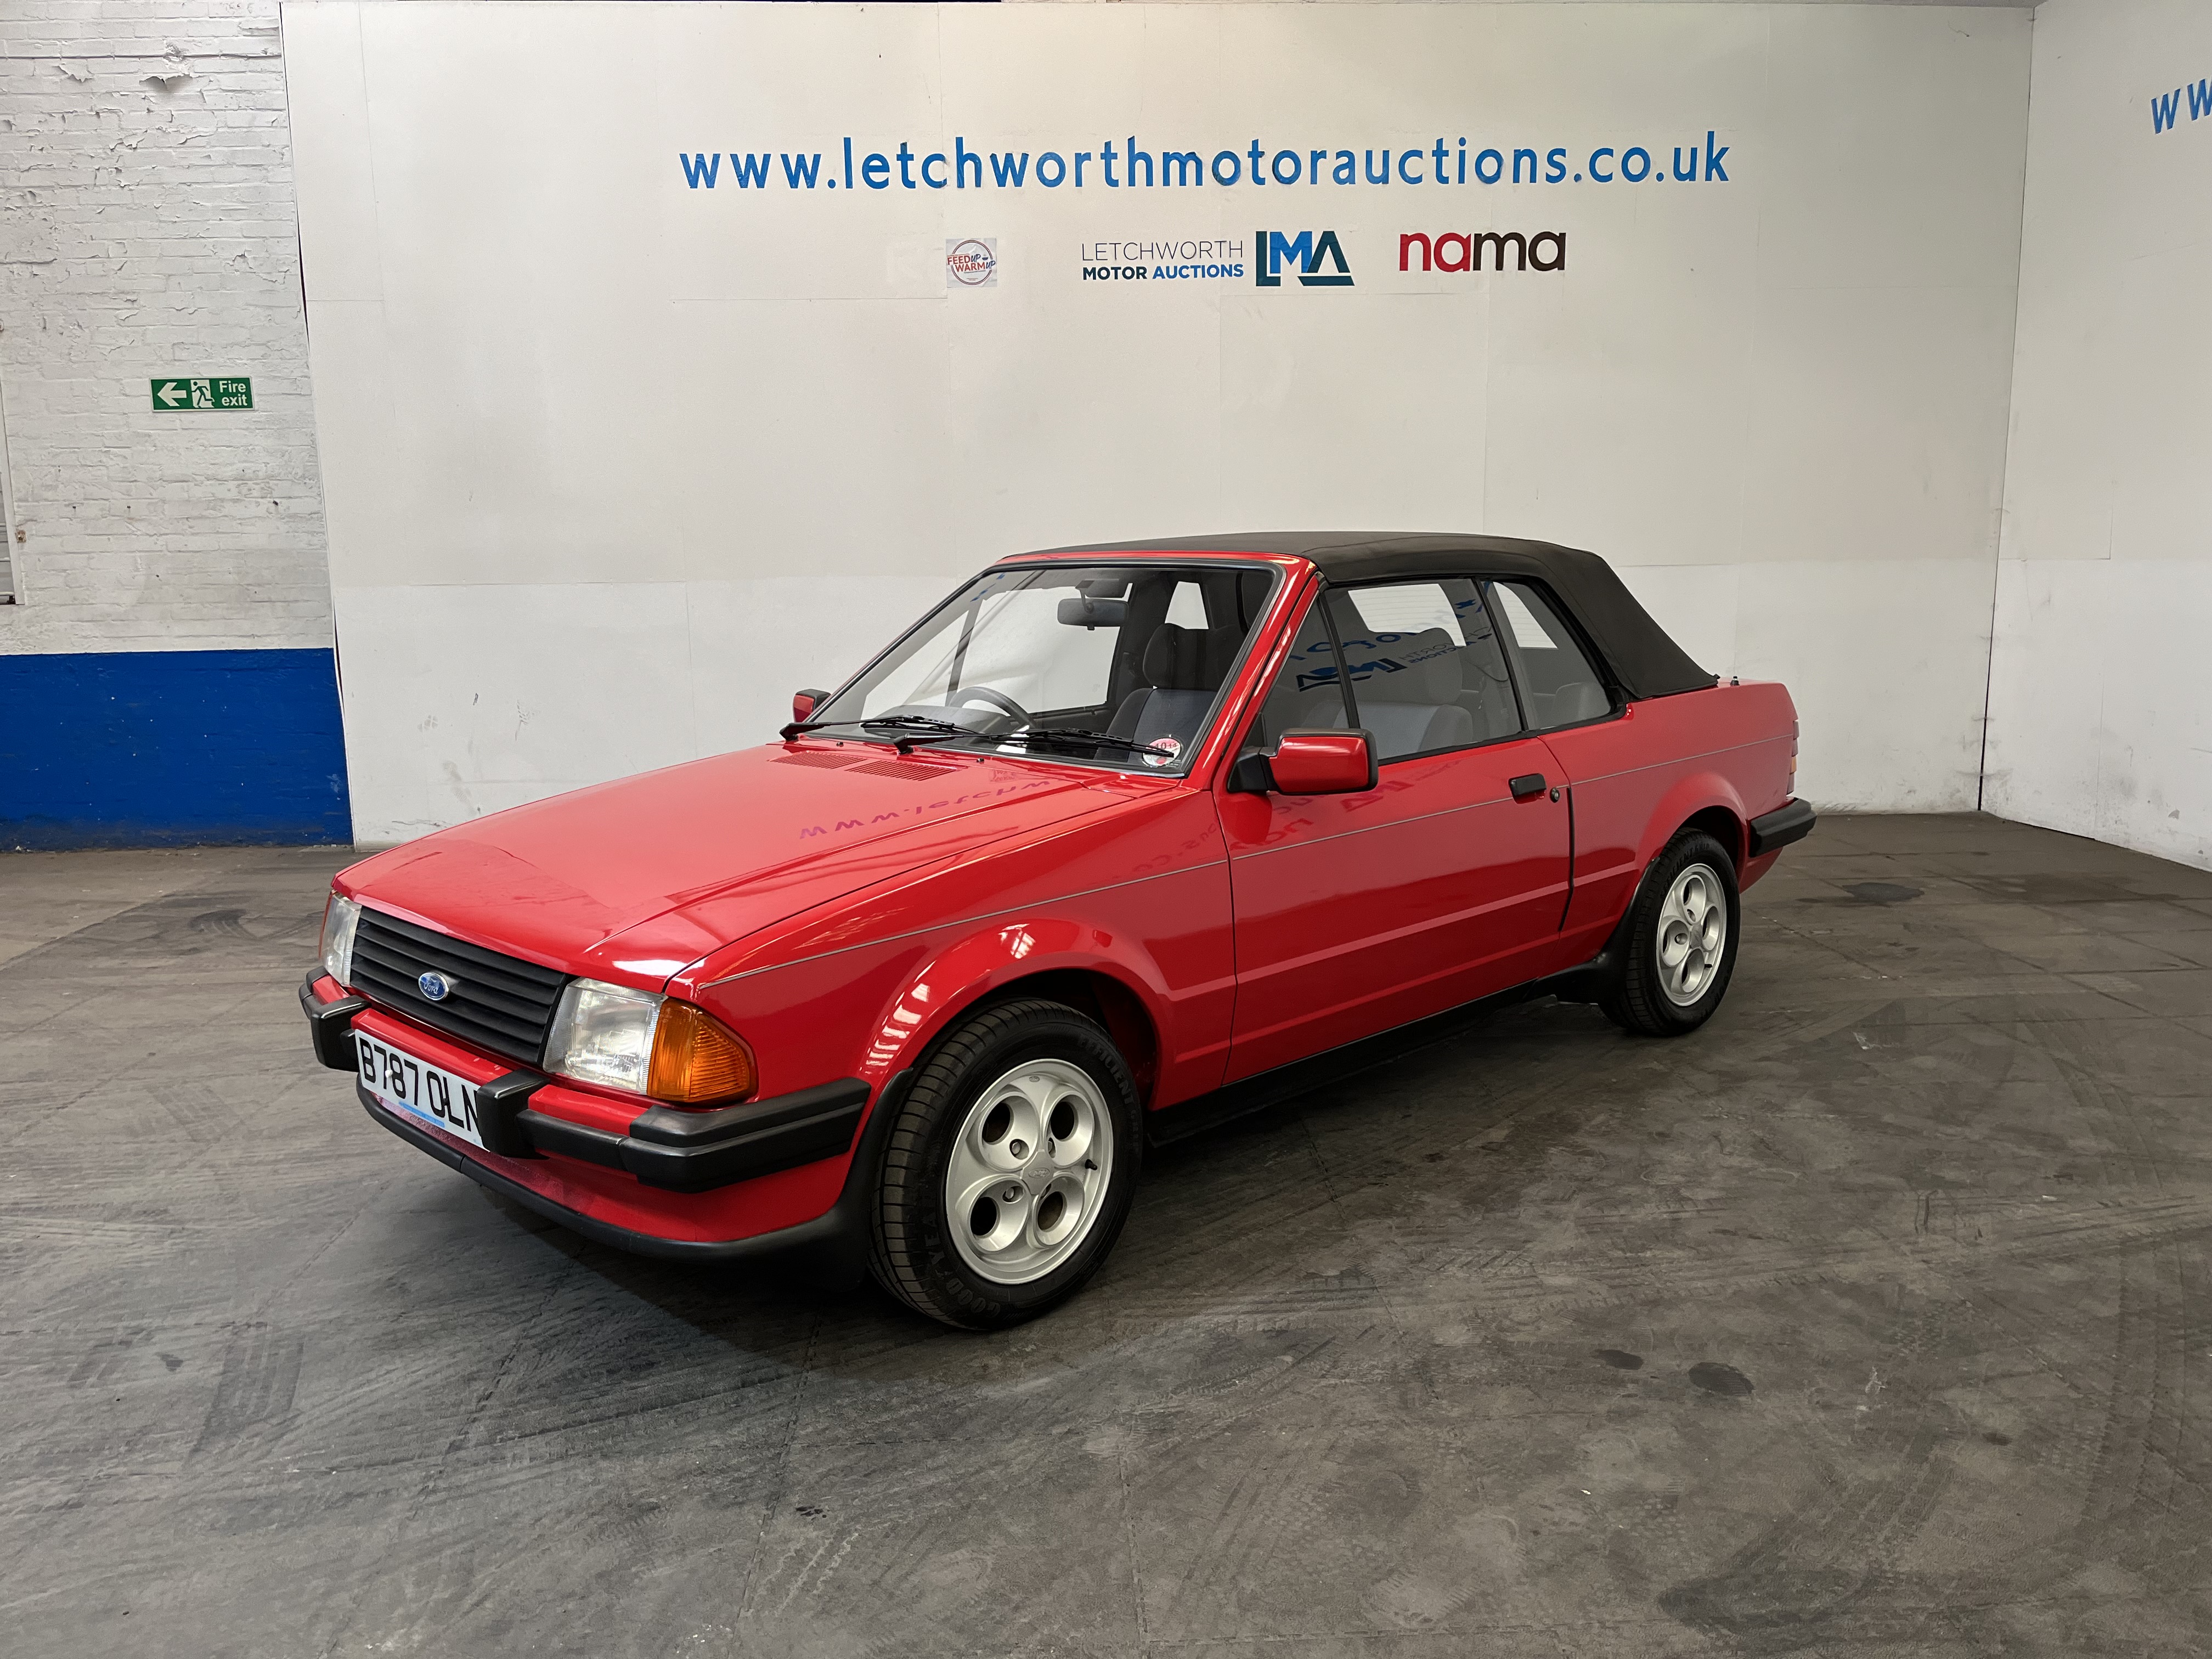 1985 Ford Escort 1.6i Cabriolet - 1597cc *ONE OWNER FROM NEW* - Image 5 of 24